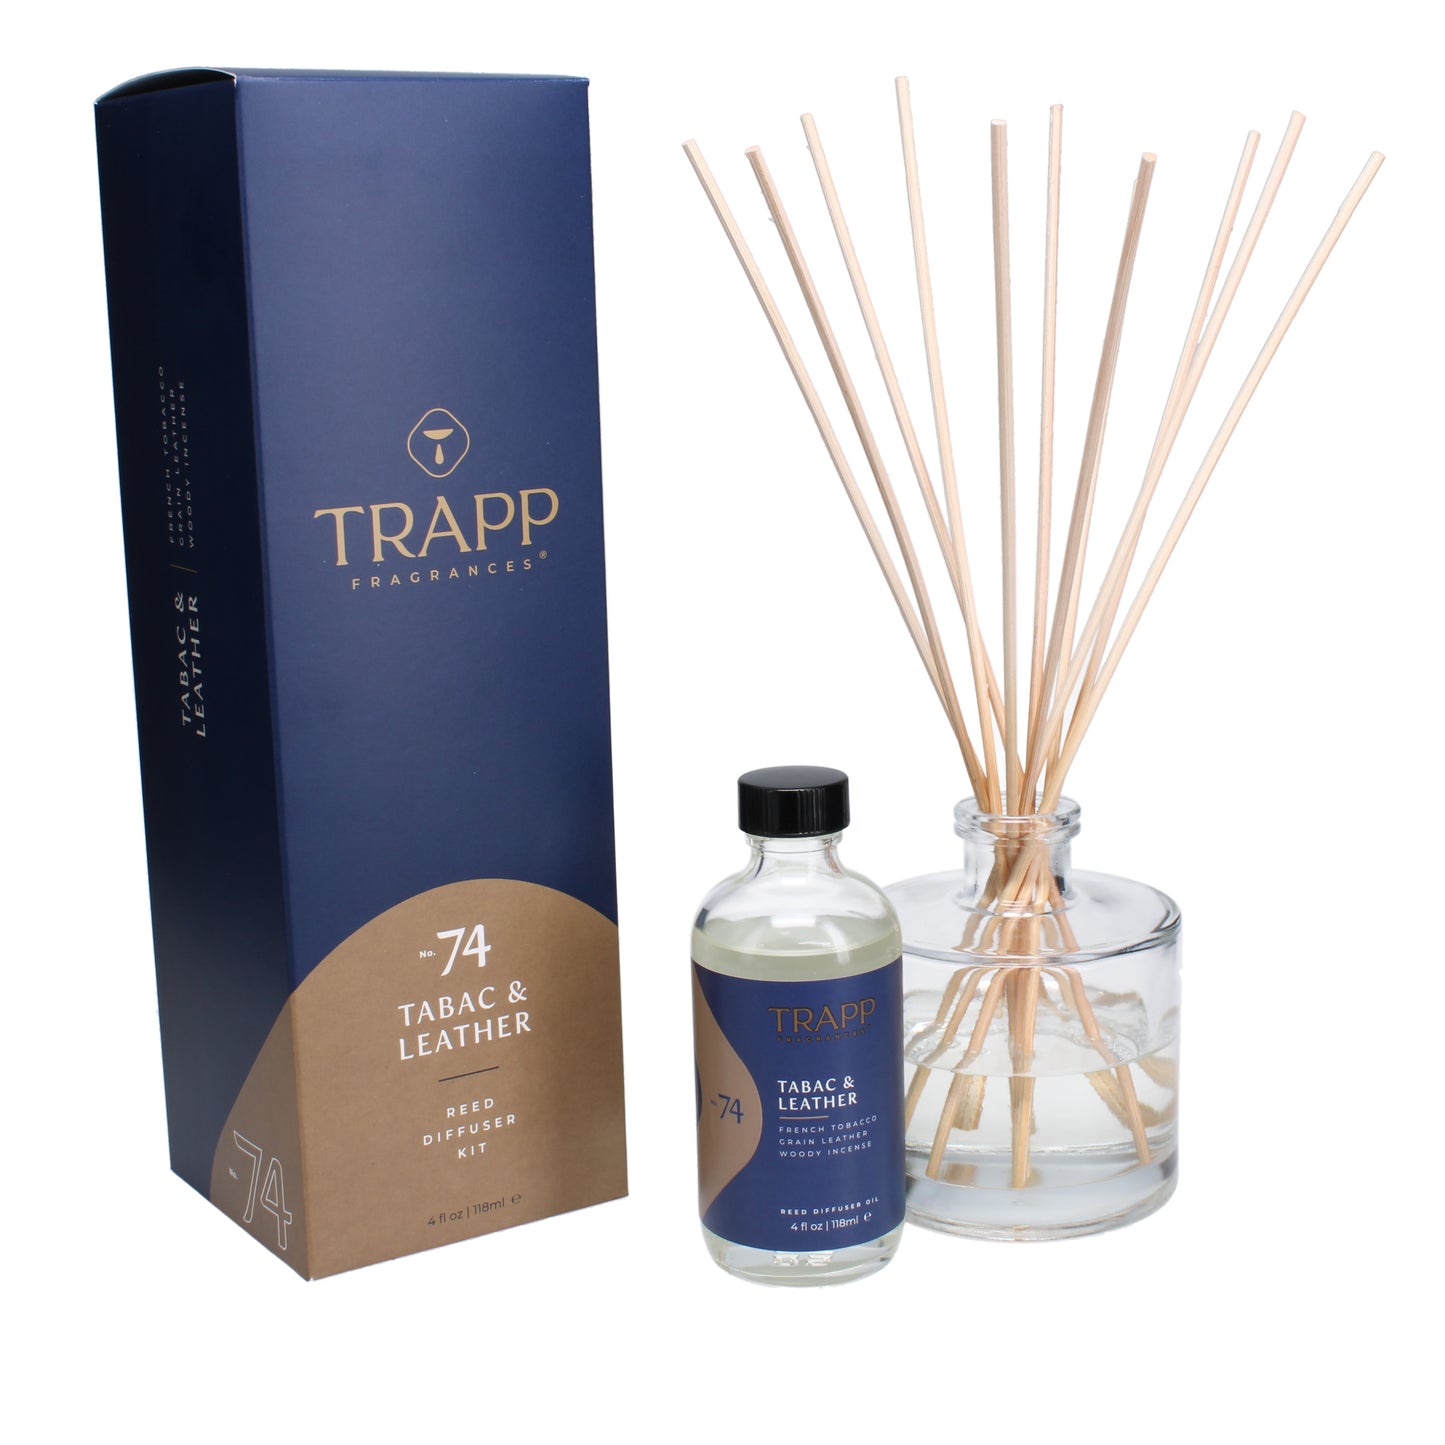 No. 74 Tabac & Leather 4 oz. Reed Diffuser Kit Image 2